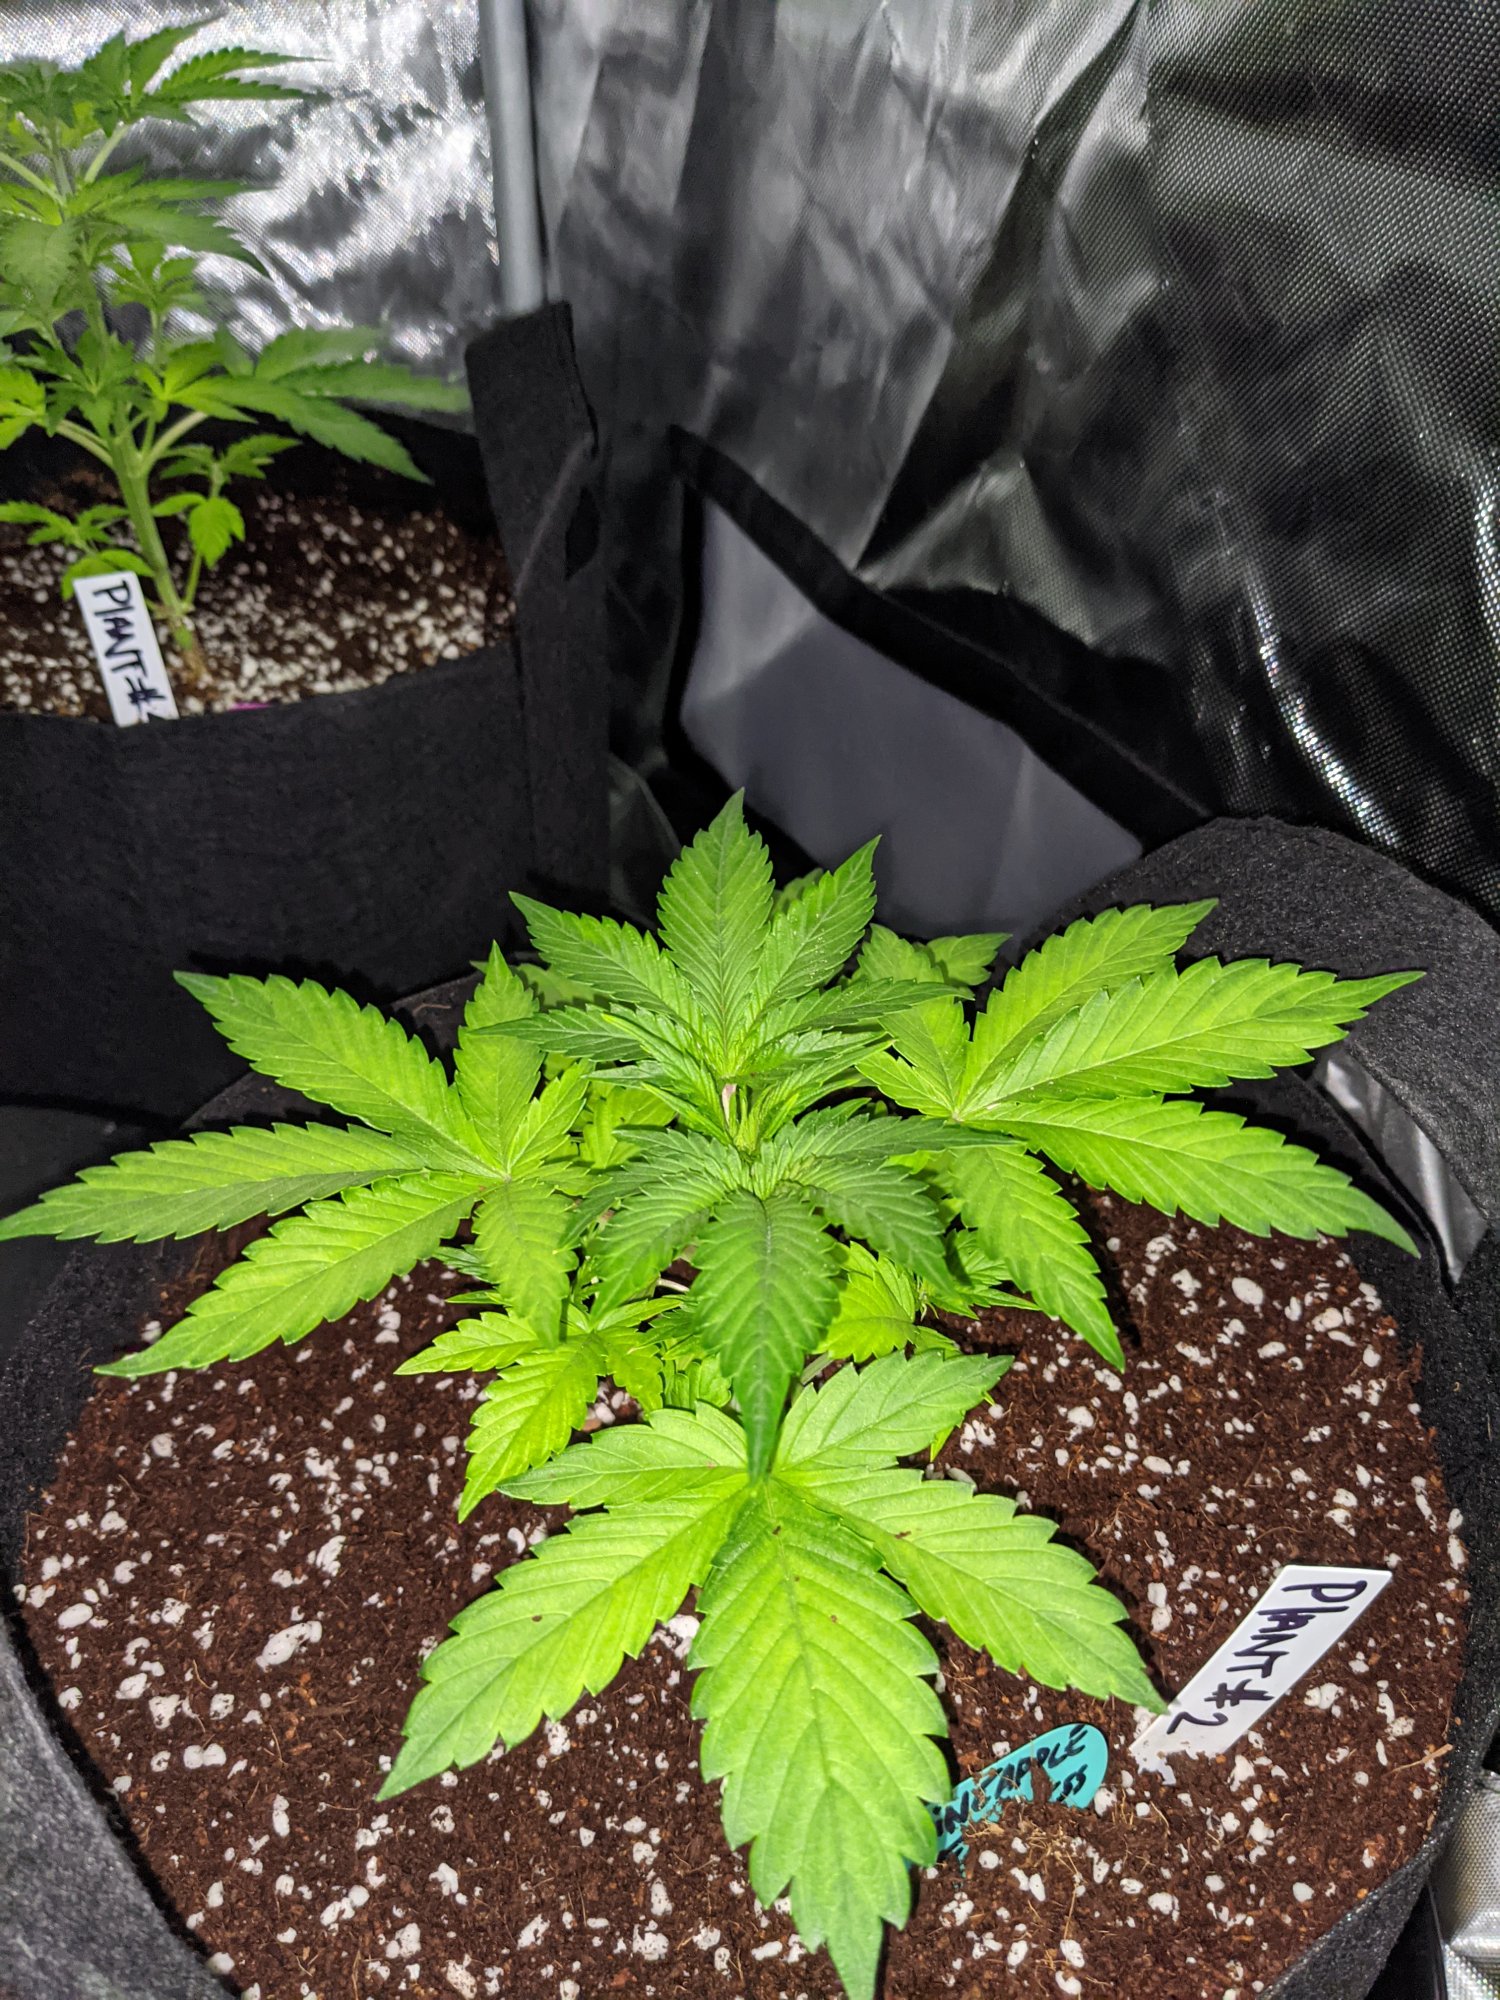 Yellowing issues with my autoflower girls 7